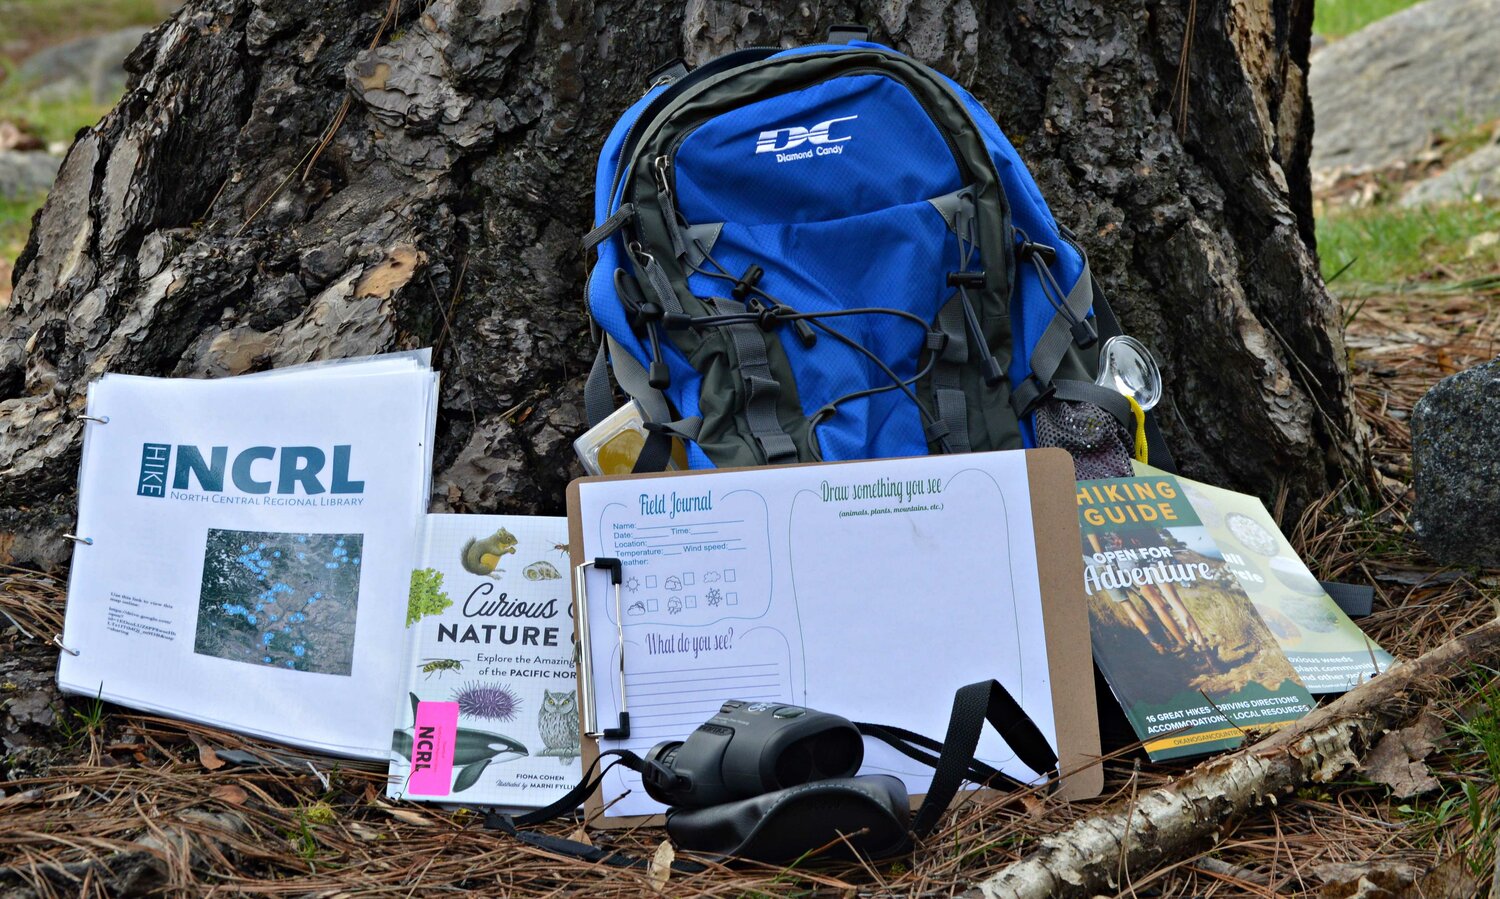 The nature backpacks available at the NCRL have several tools and guides to aid patrons on their outdoor journey. Photo illustration by Al Stover